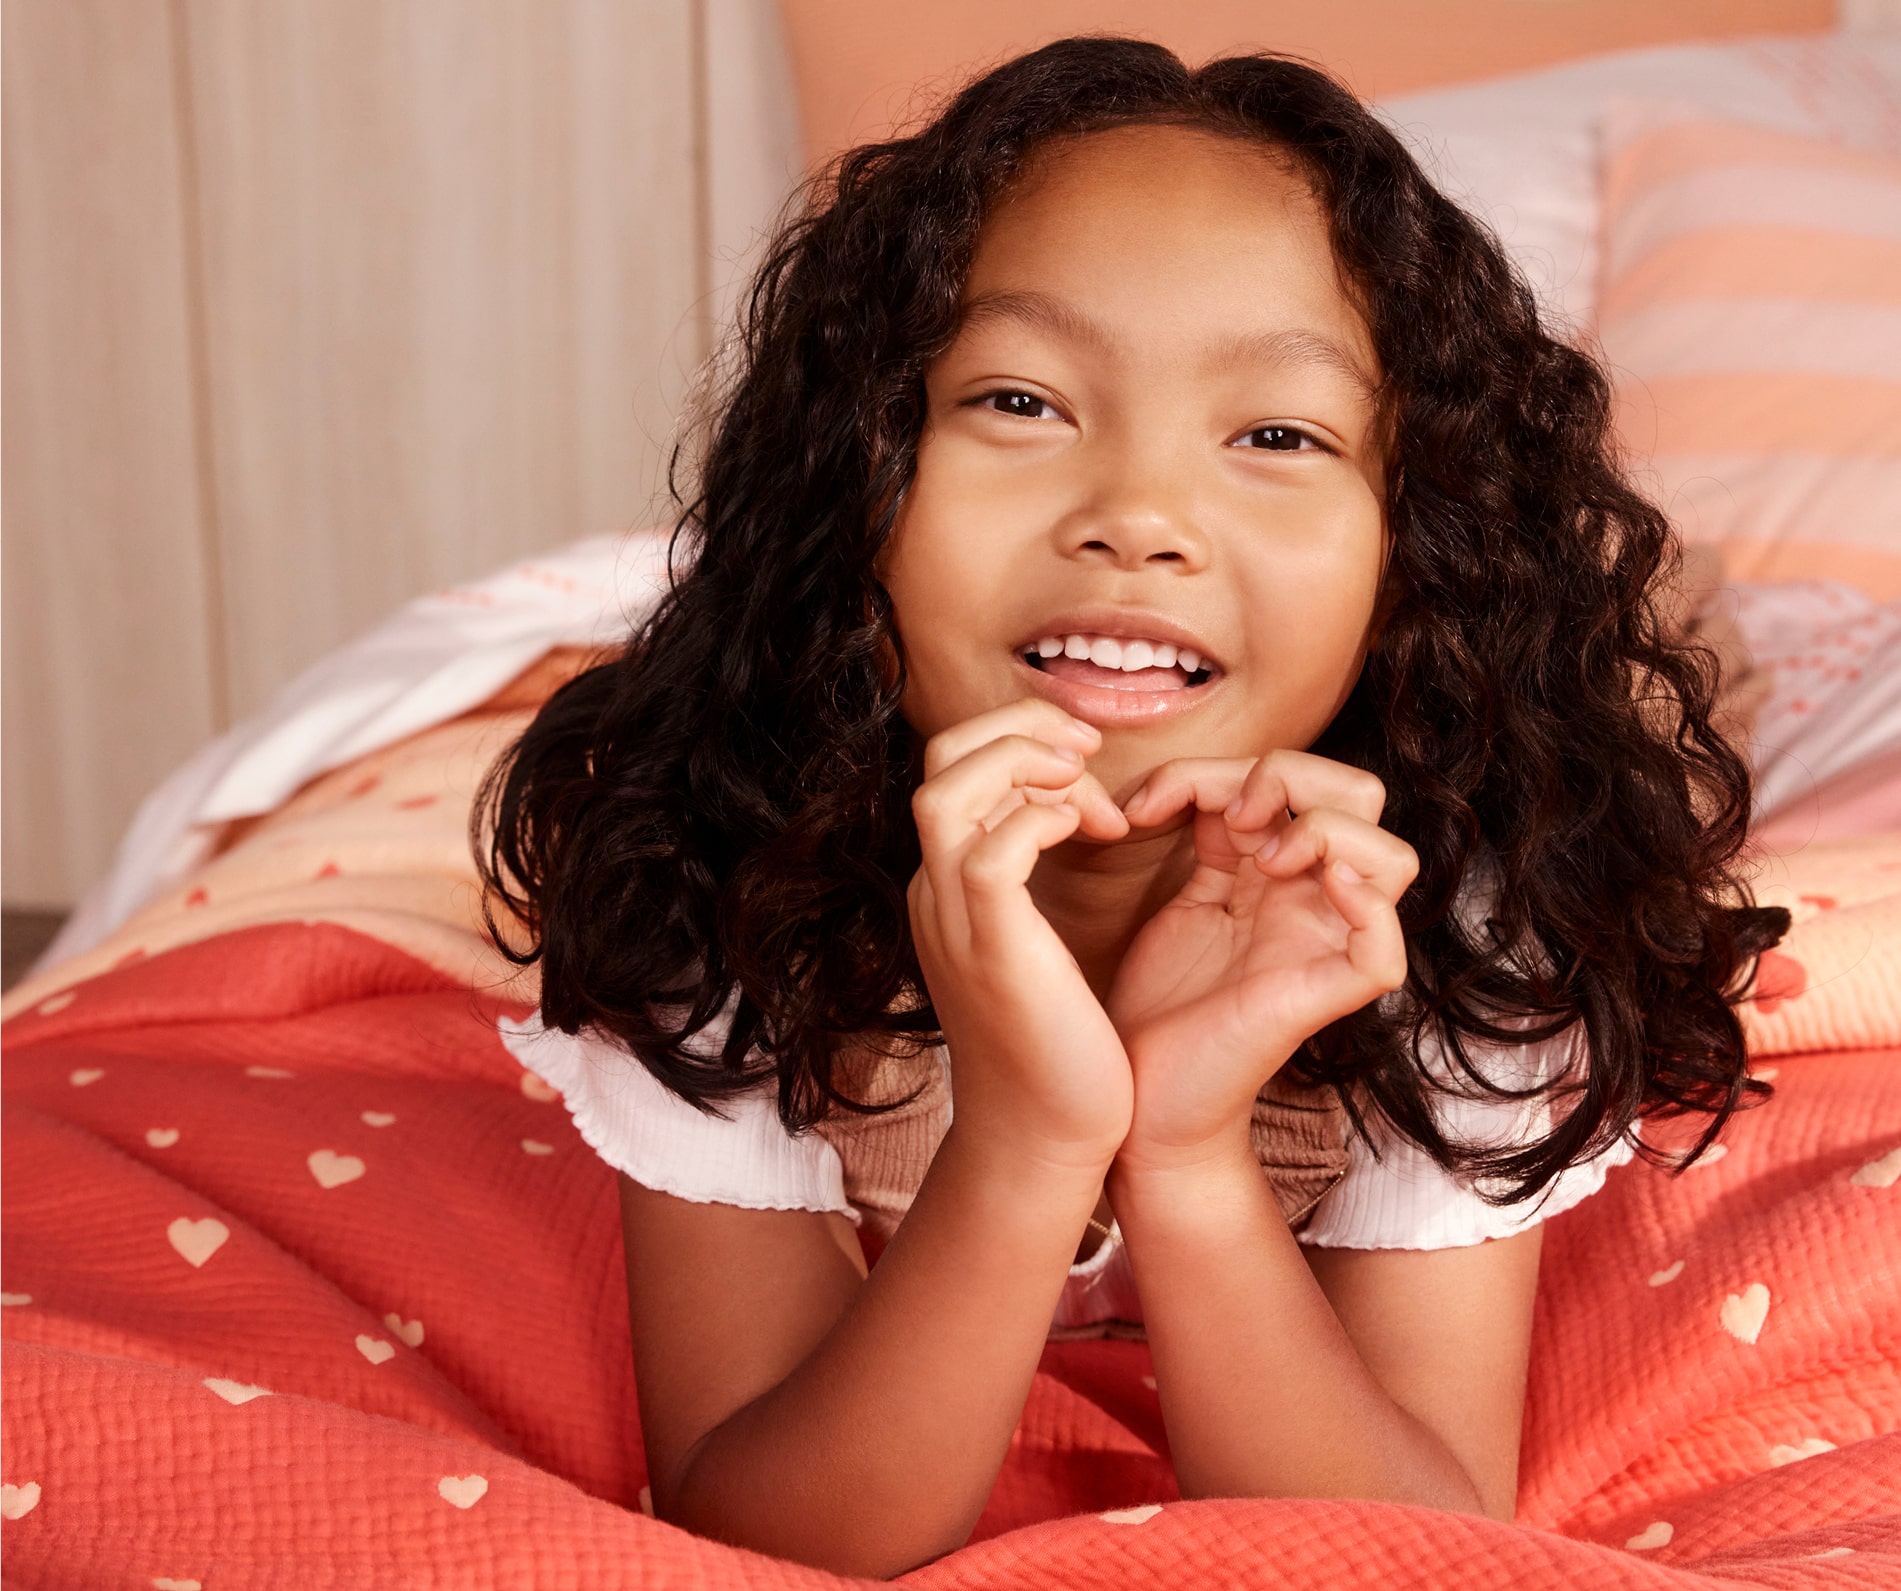 young girl lies on a bed, on her stomach with her elbows propped up, smiling at the camera and making the shape of a heart with her hands. bed has been styled with quilted bed cover, red and peach with little hearts.